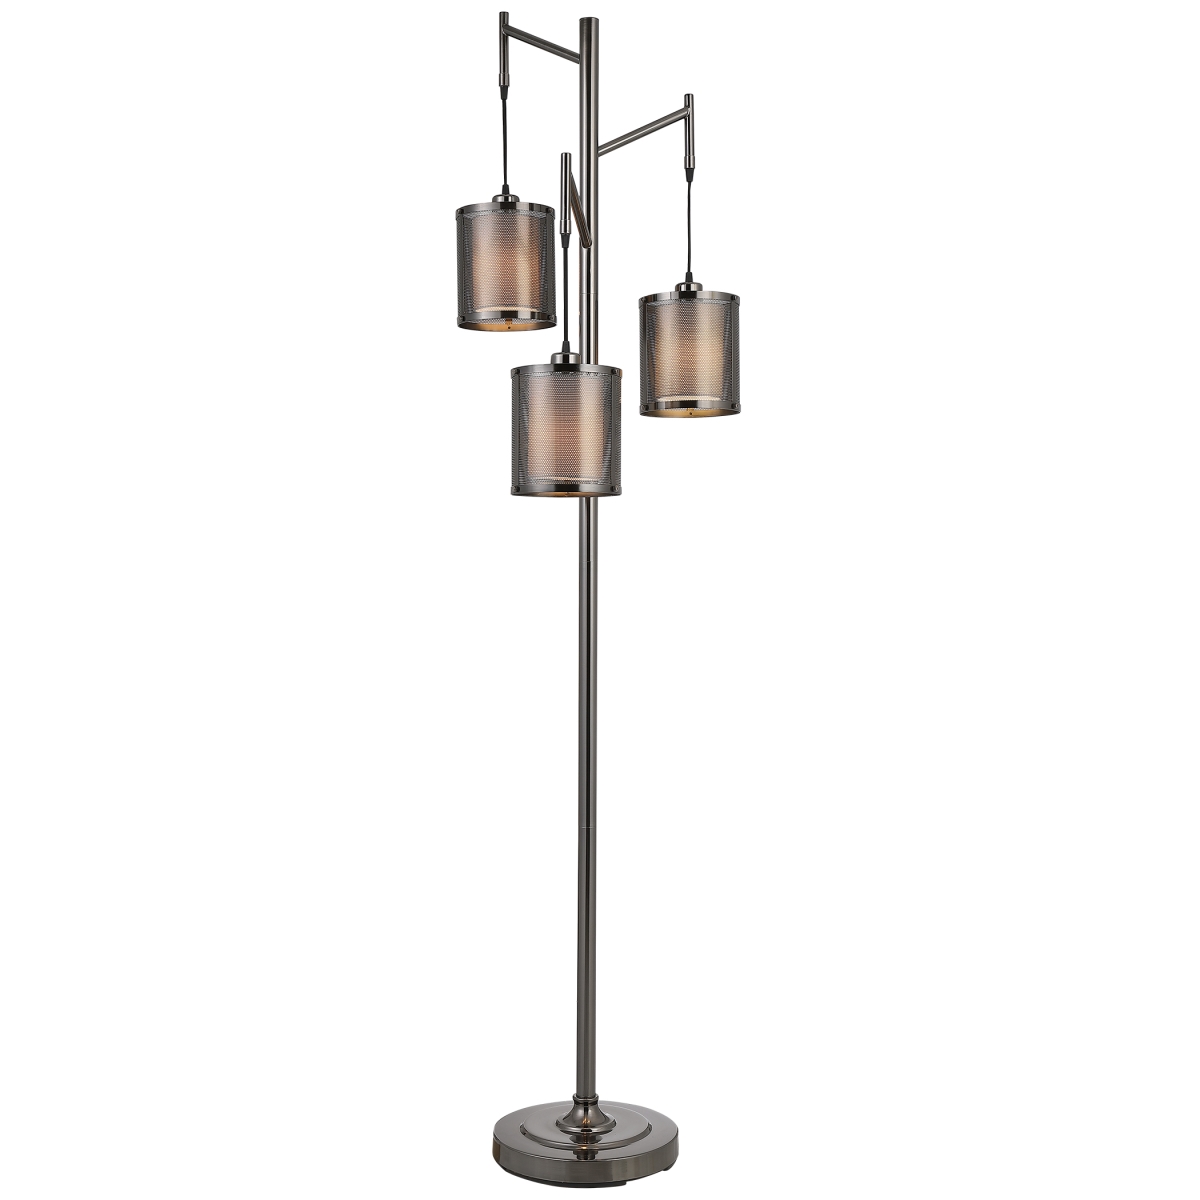 UPC 792977000014 product image for W26076-1 7 x 8 in. 74 in. Floor Lamp | upcitemdb.com